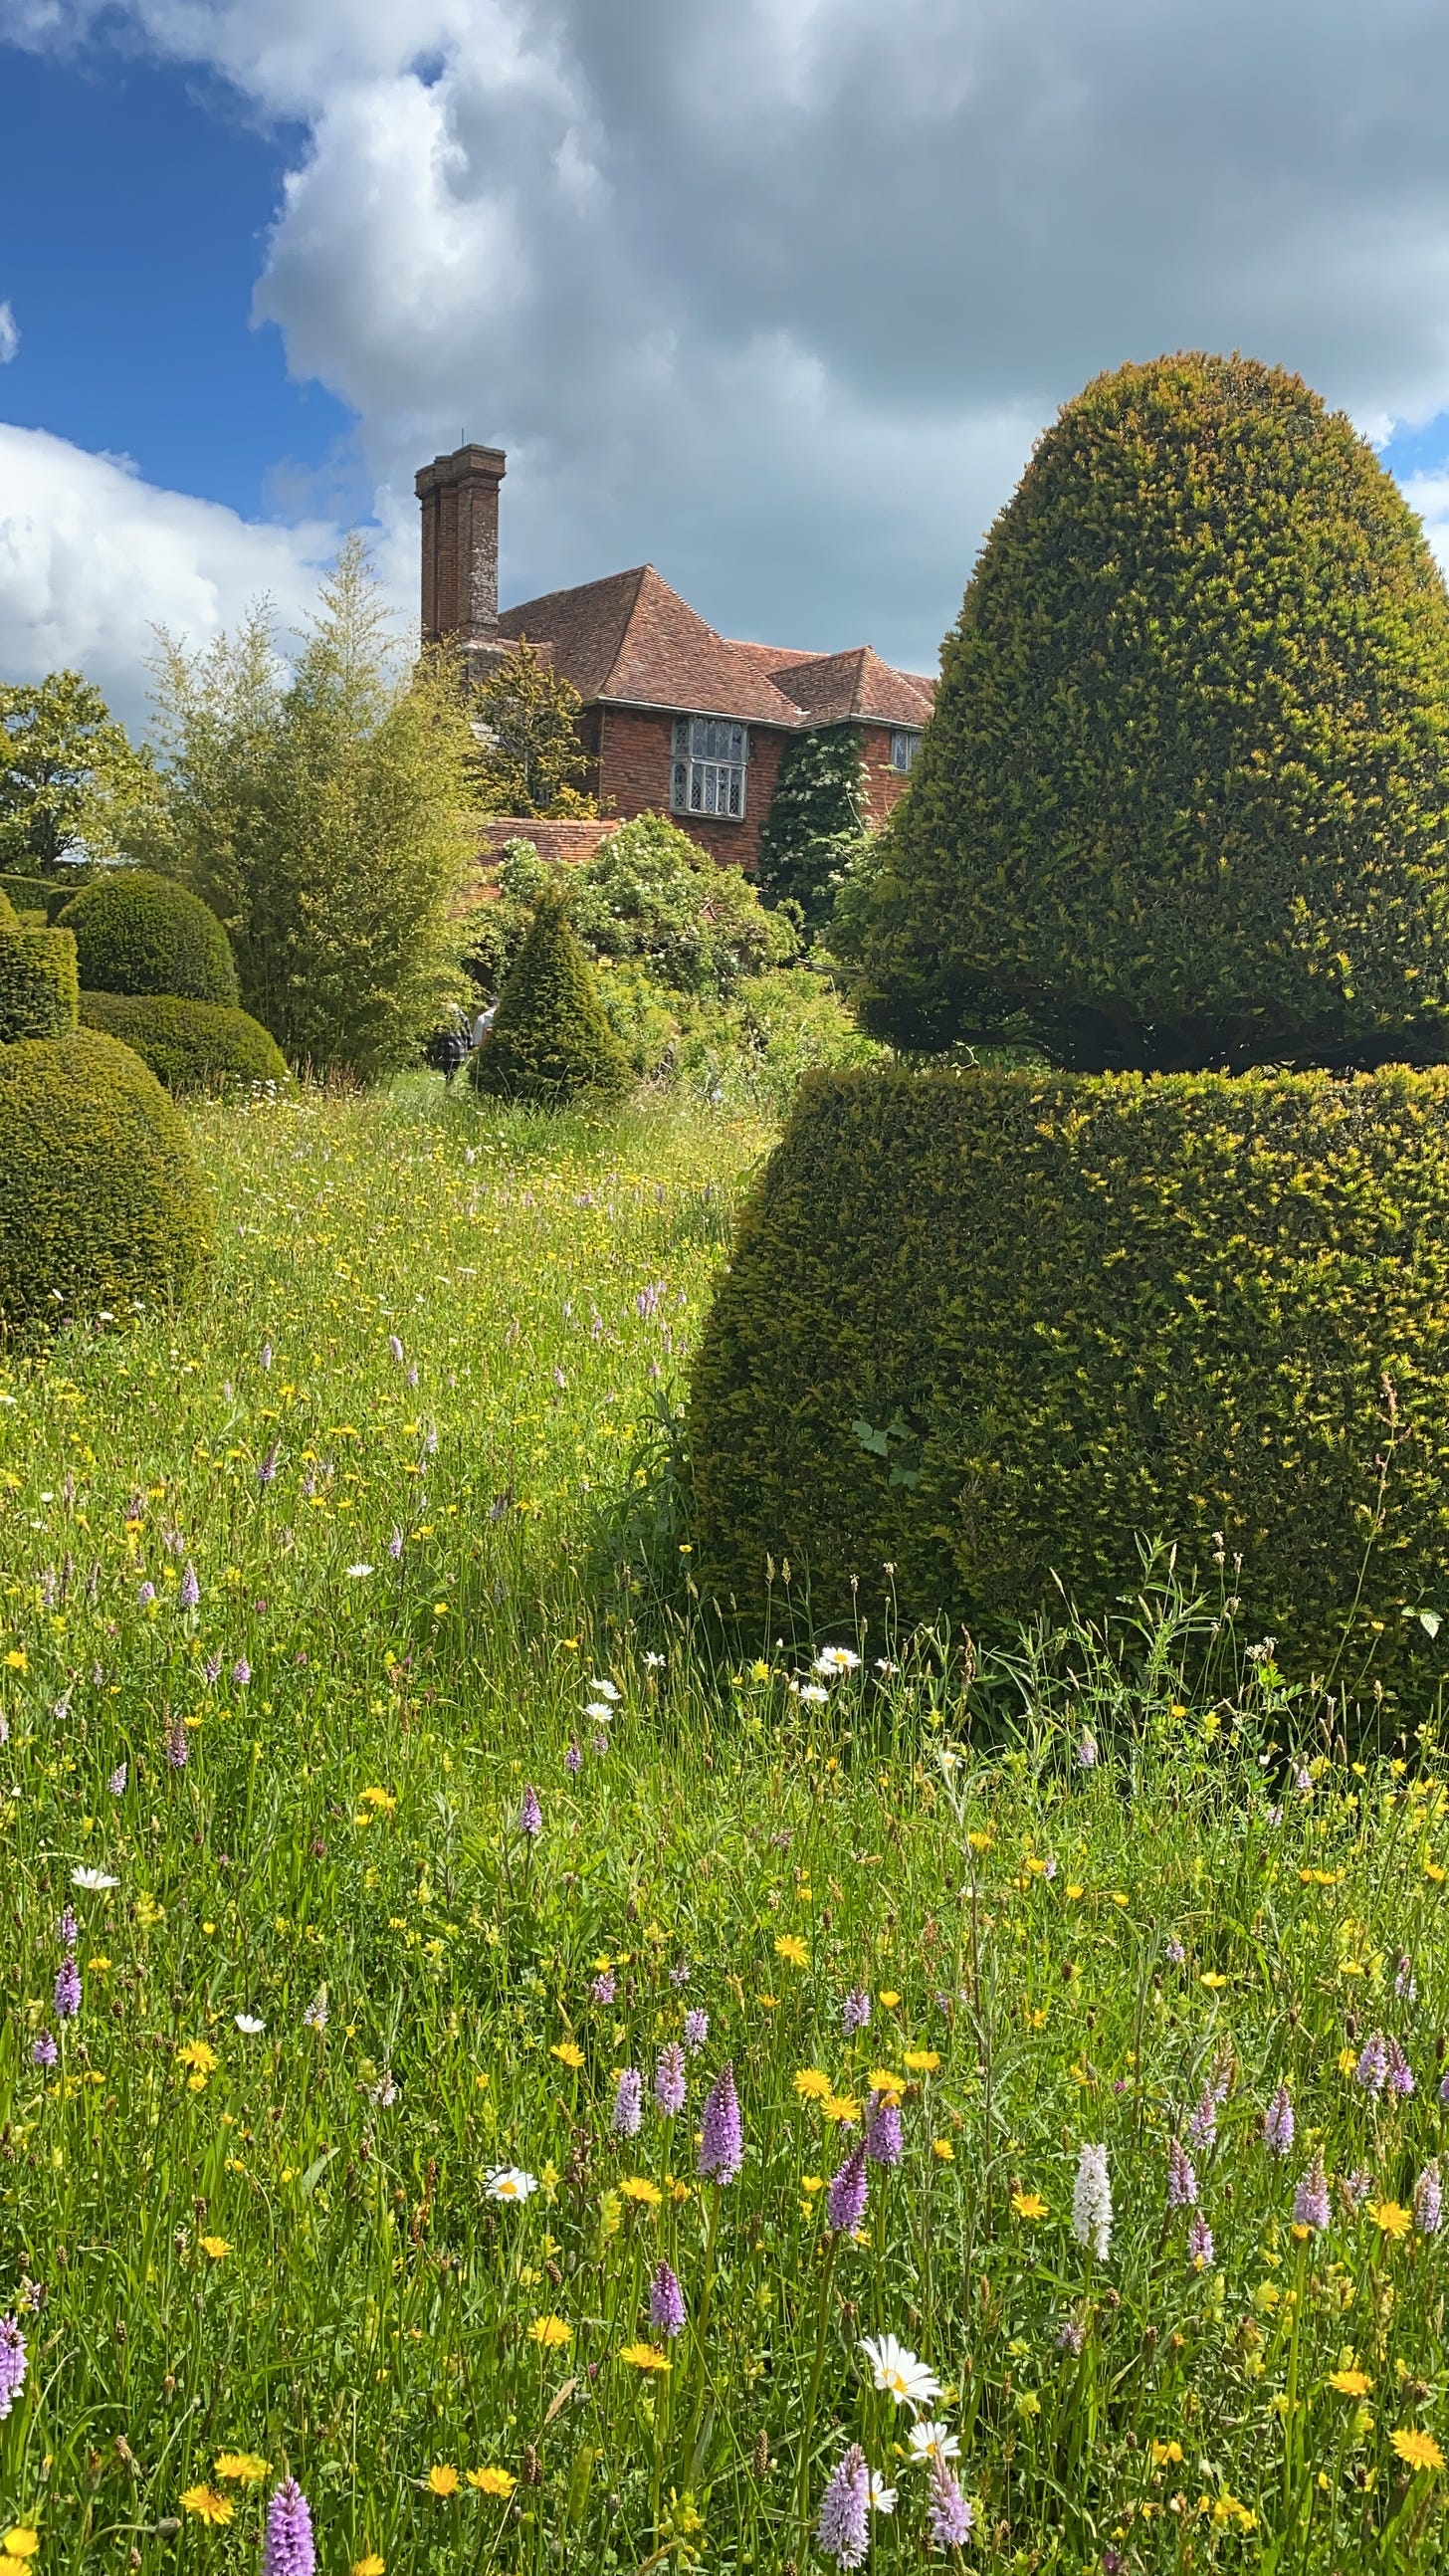 The Topiary Lawn at Great Dixter. Photo by Marianne Willburn